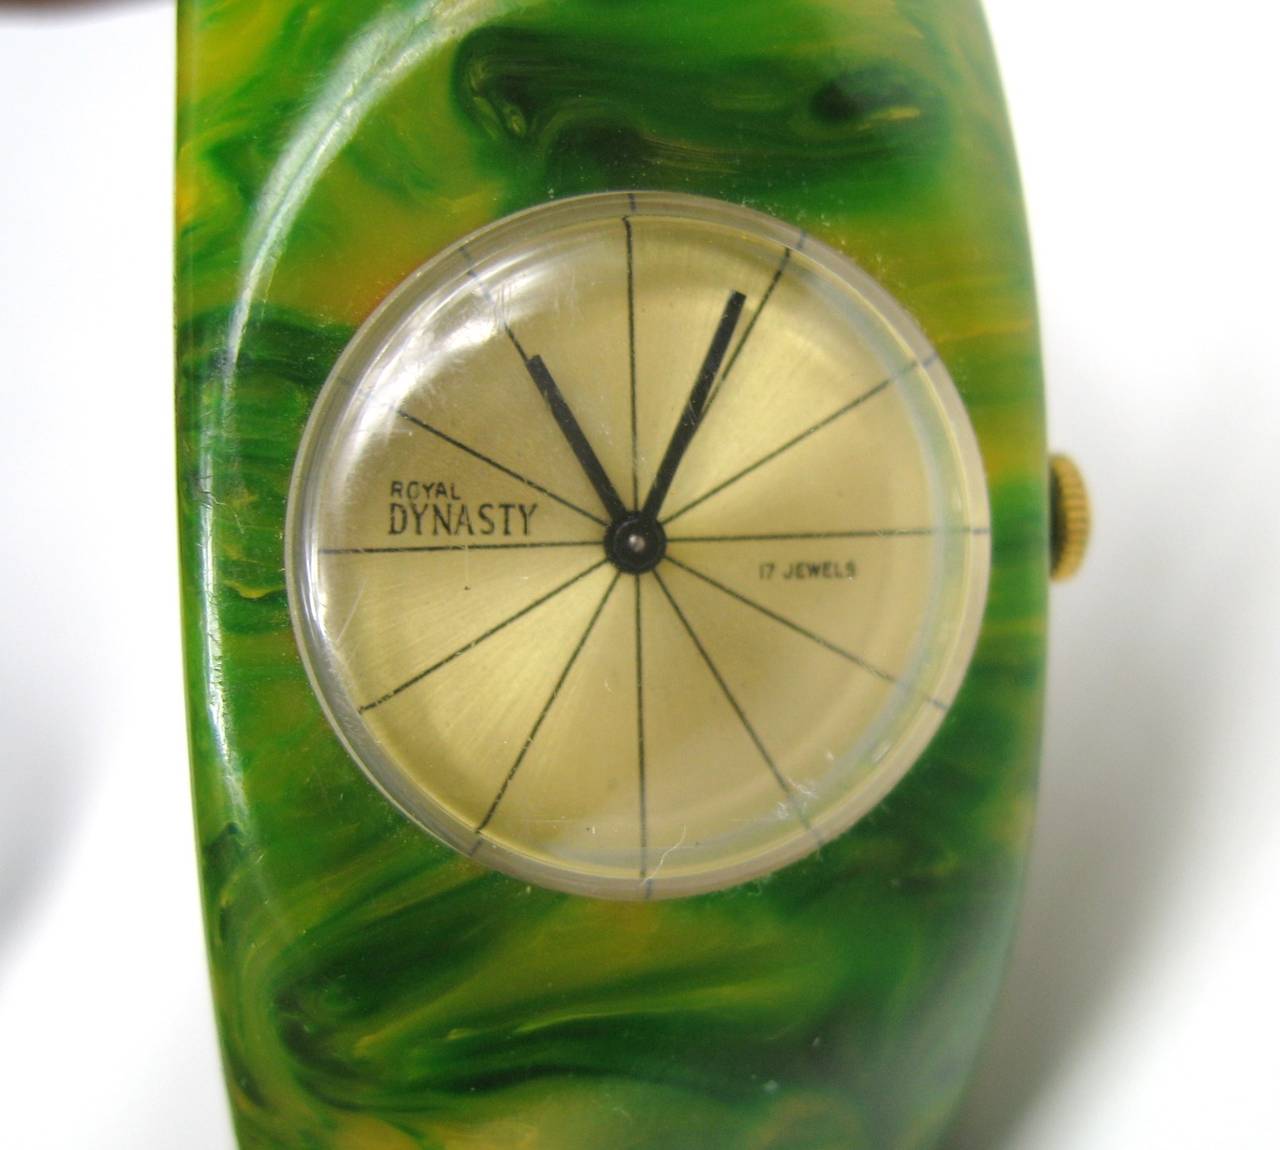 A rare vintage genuine spinach Bakelite / Catalin clamper watch bracelet. There is a hinge that allows the bracelet to open up and slip on your wrist. Royal Dynasty 17 Jewels. watch is working. Measures The inside  measures 2 1/4 inches wide-  band